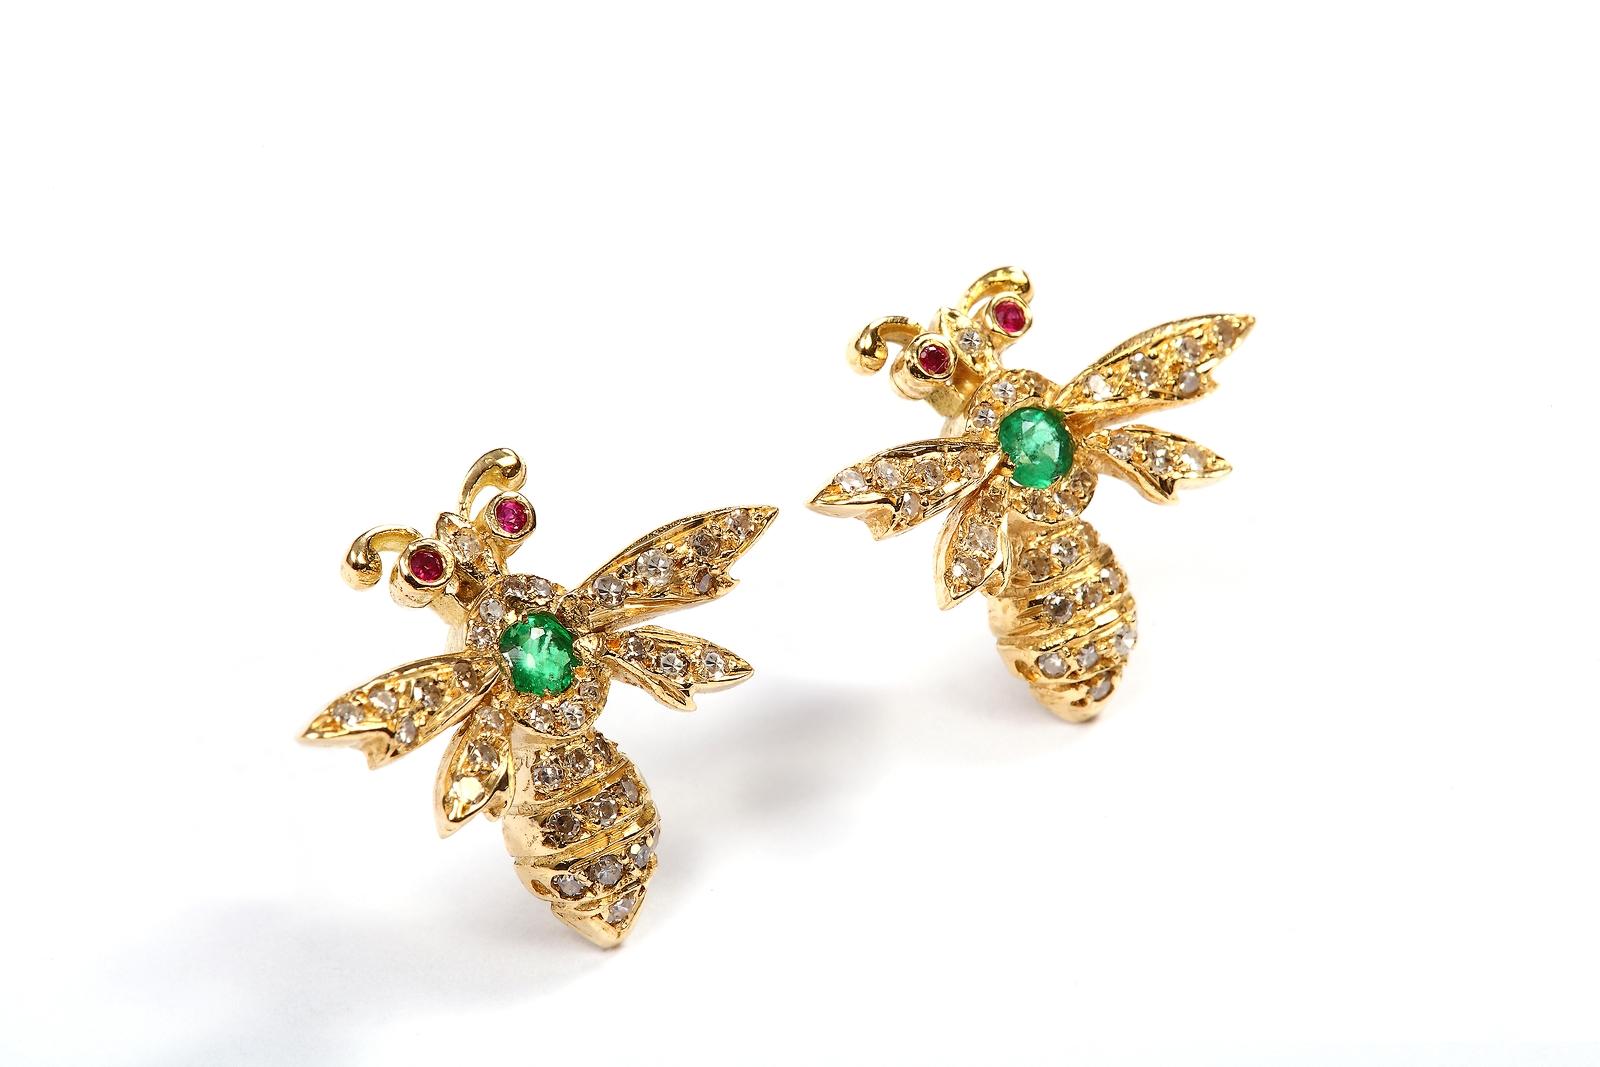 Handcarved in lost wax, then cast in 18k yellow gold set with 0,20ct diamonds, 0,10ct emeralds and 0,06ct rubies, these stunning Aida Bergsen Wasp Studs compliment its wearer in an eccentric yet elegant manner.

This product is available in